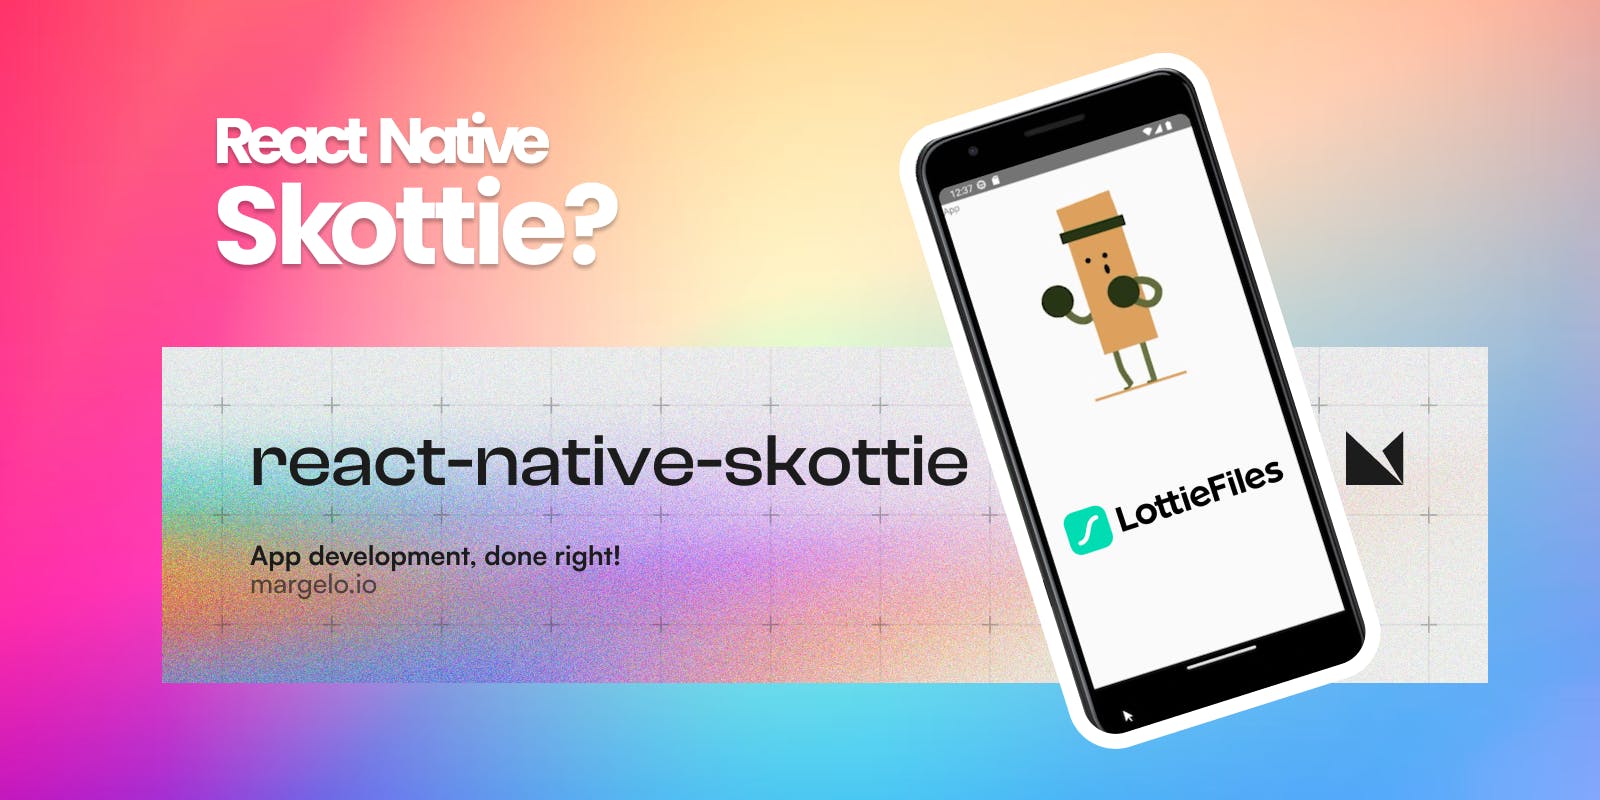 How to add react native skottie in a react-native app